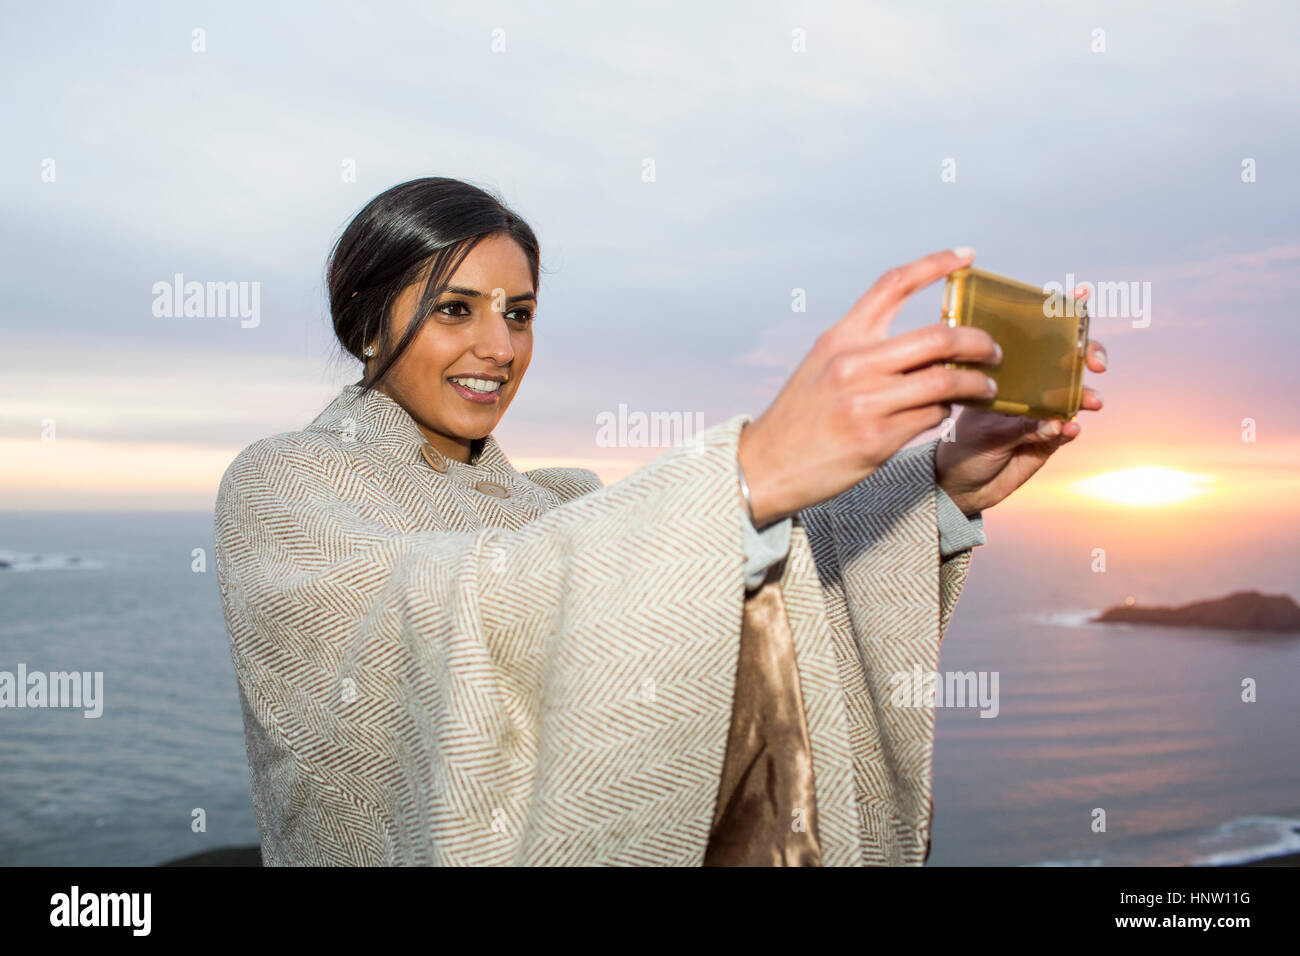 Indian woman posing for cell phone selfie near ocean Stock Photo